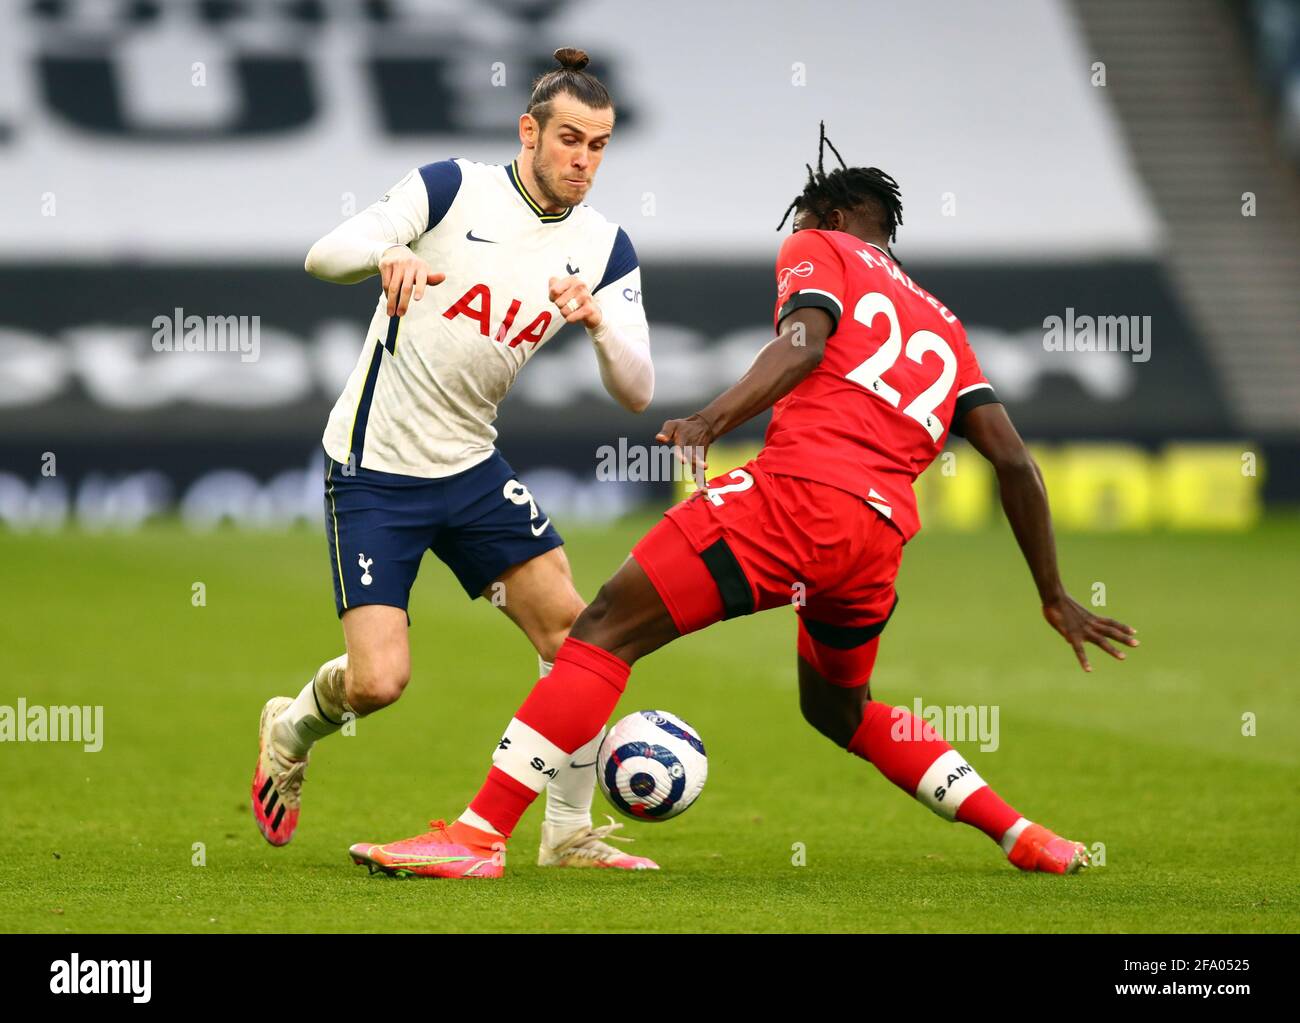 Tottenham Hotspur's Gareth Bale and Southampton's Mohammed Salisu (right) battle for the ball during the Premier League match at the Tottenham Hotspur Stadium, London. Picture date: Wednesday April 21, 2021. Stock Photo